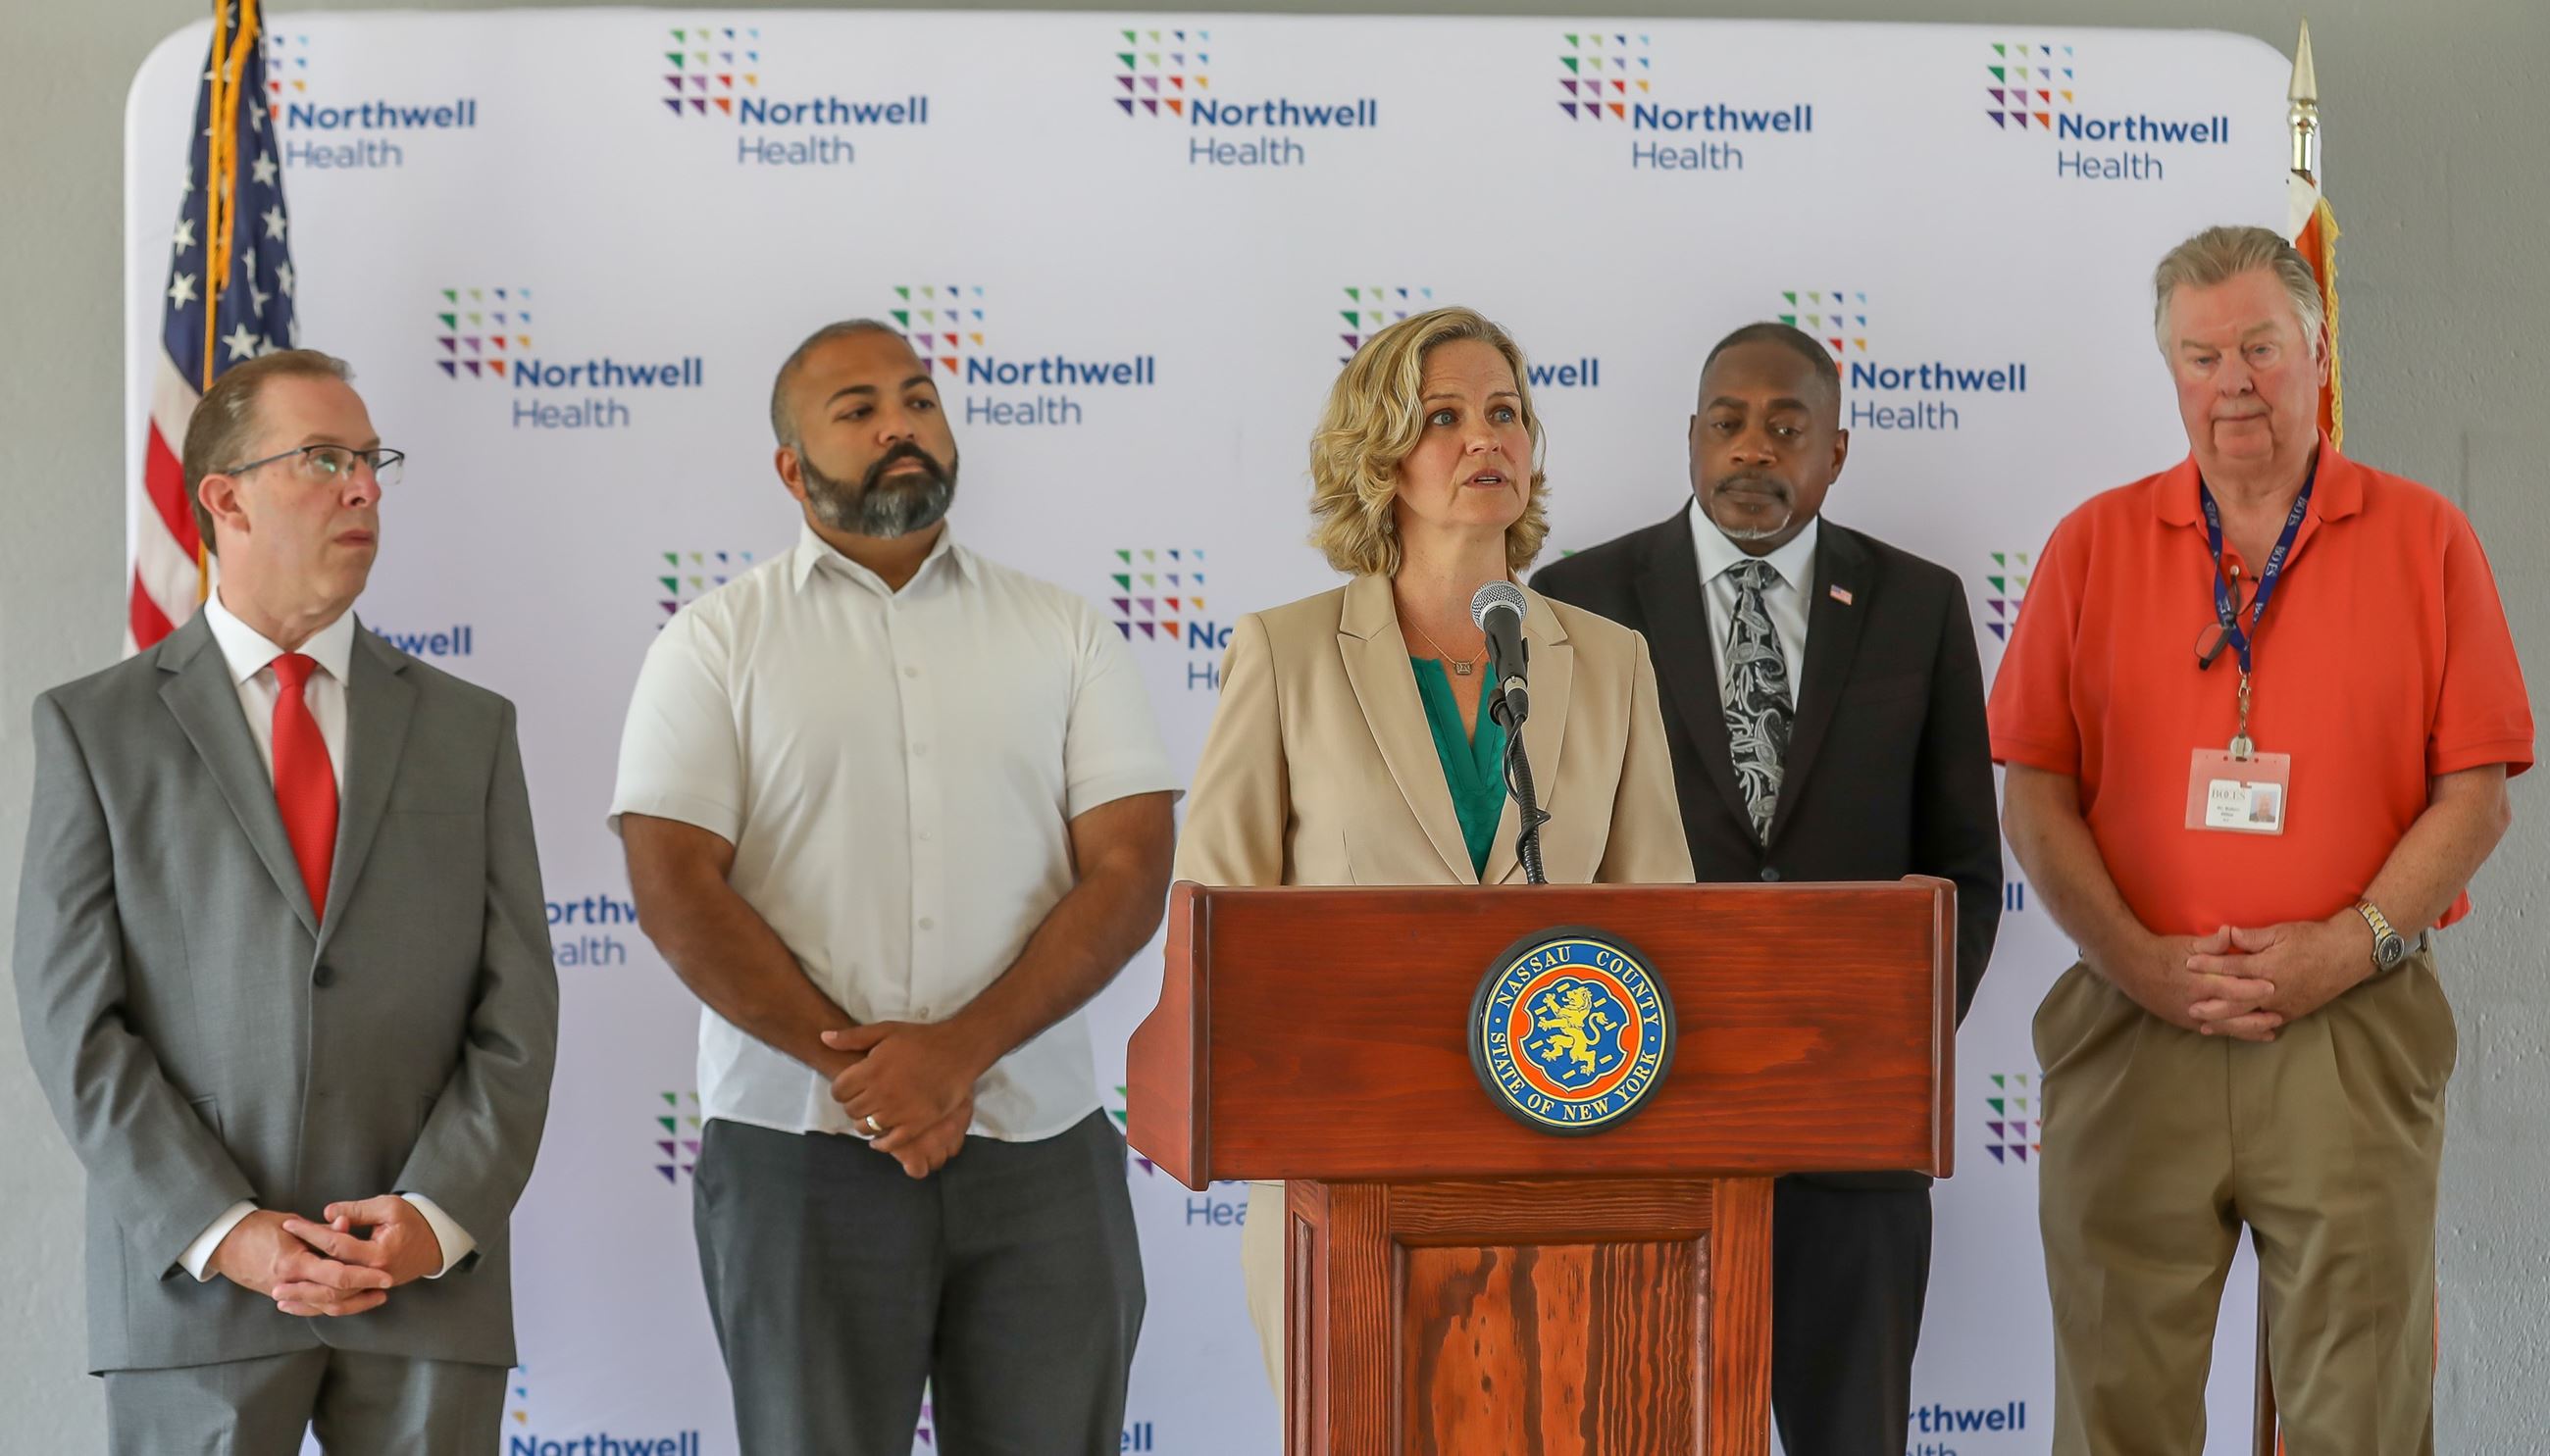 2021-07-22 -8848 - Curran Announces Upcoming Student Vaccination Days in Partnership with Northwell 